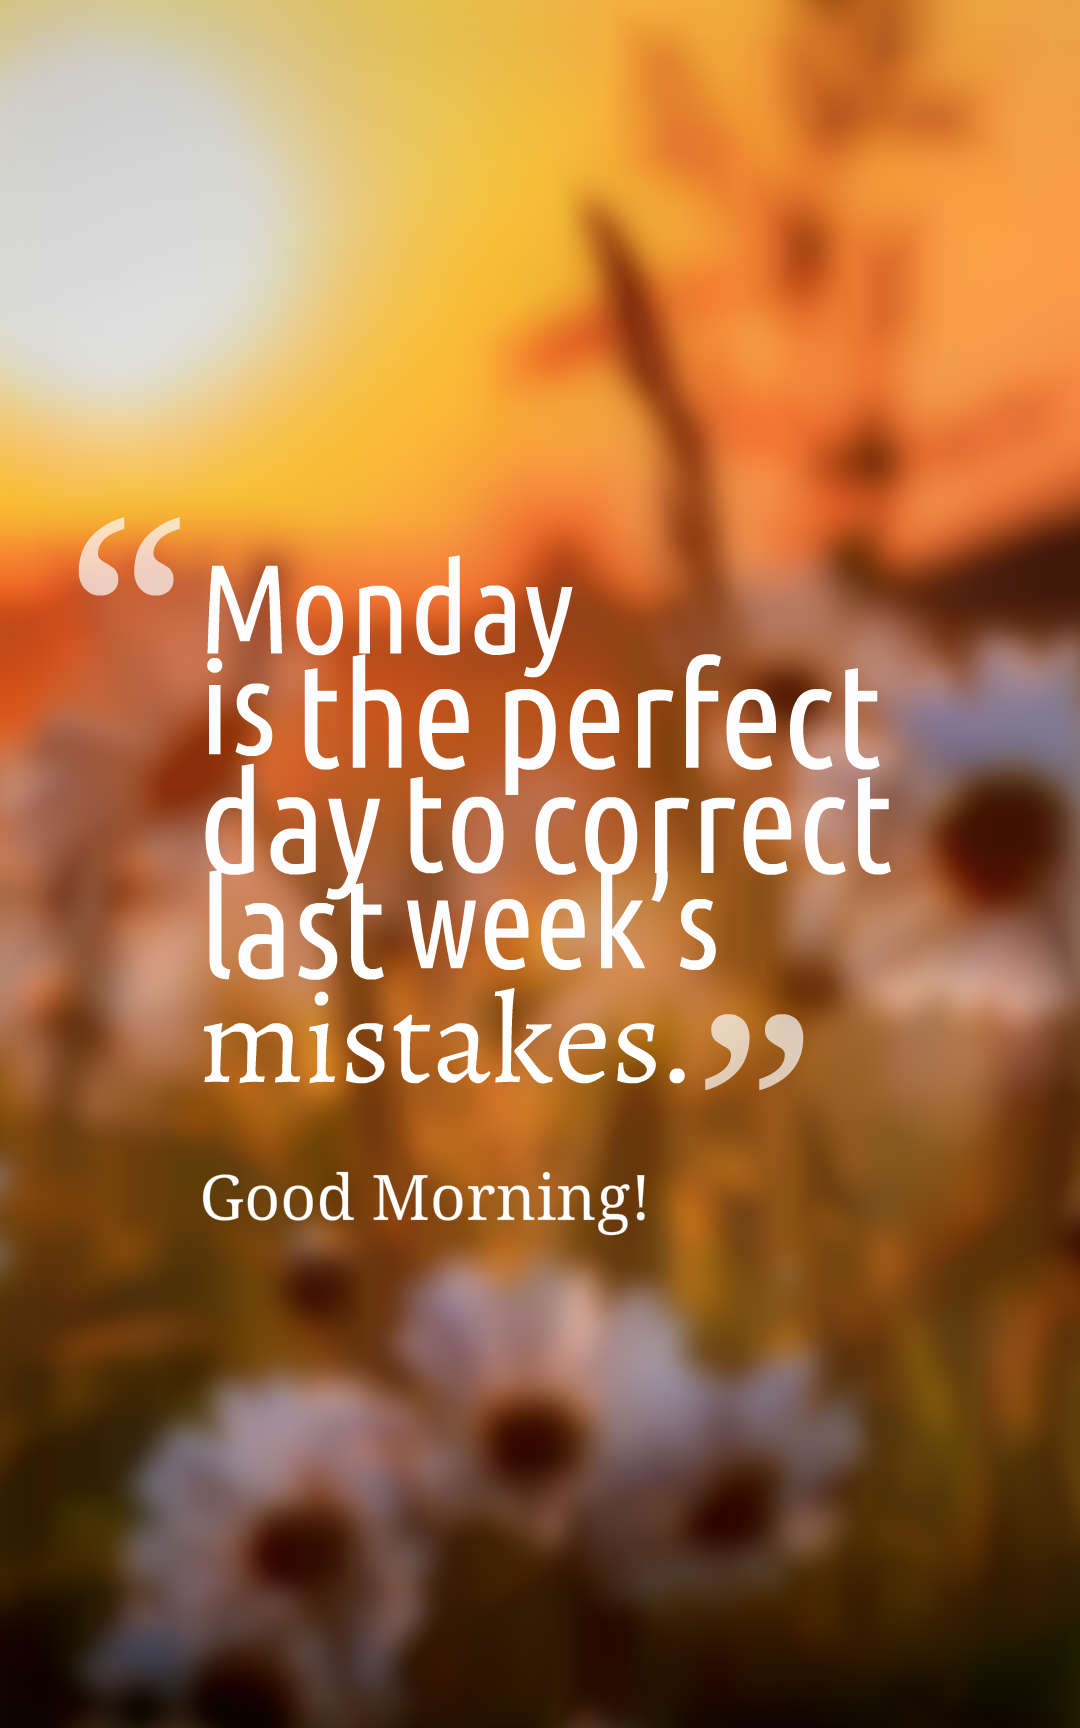 Monday is the perfect day to correct last week’s mistakes